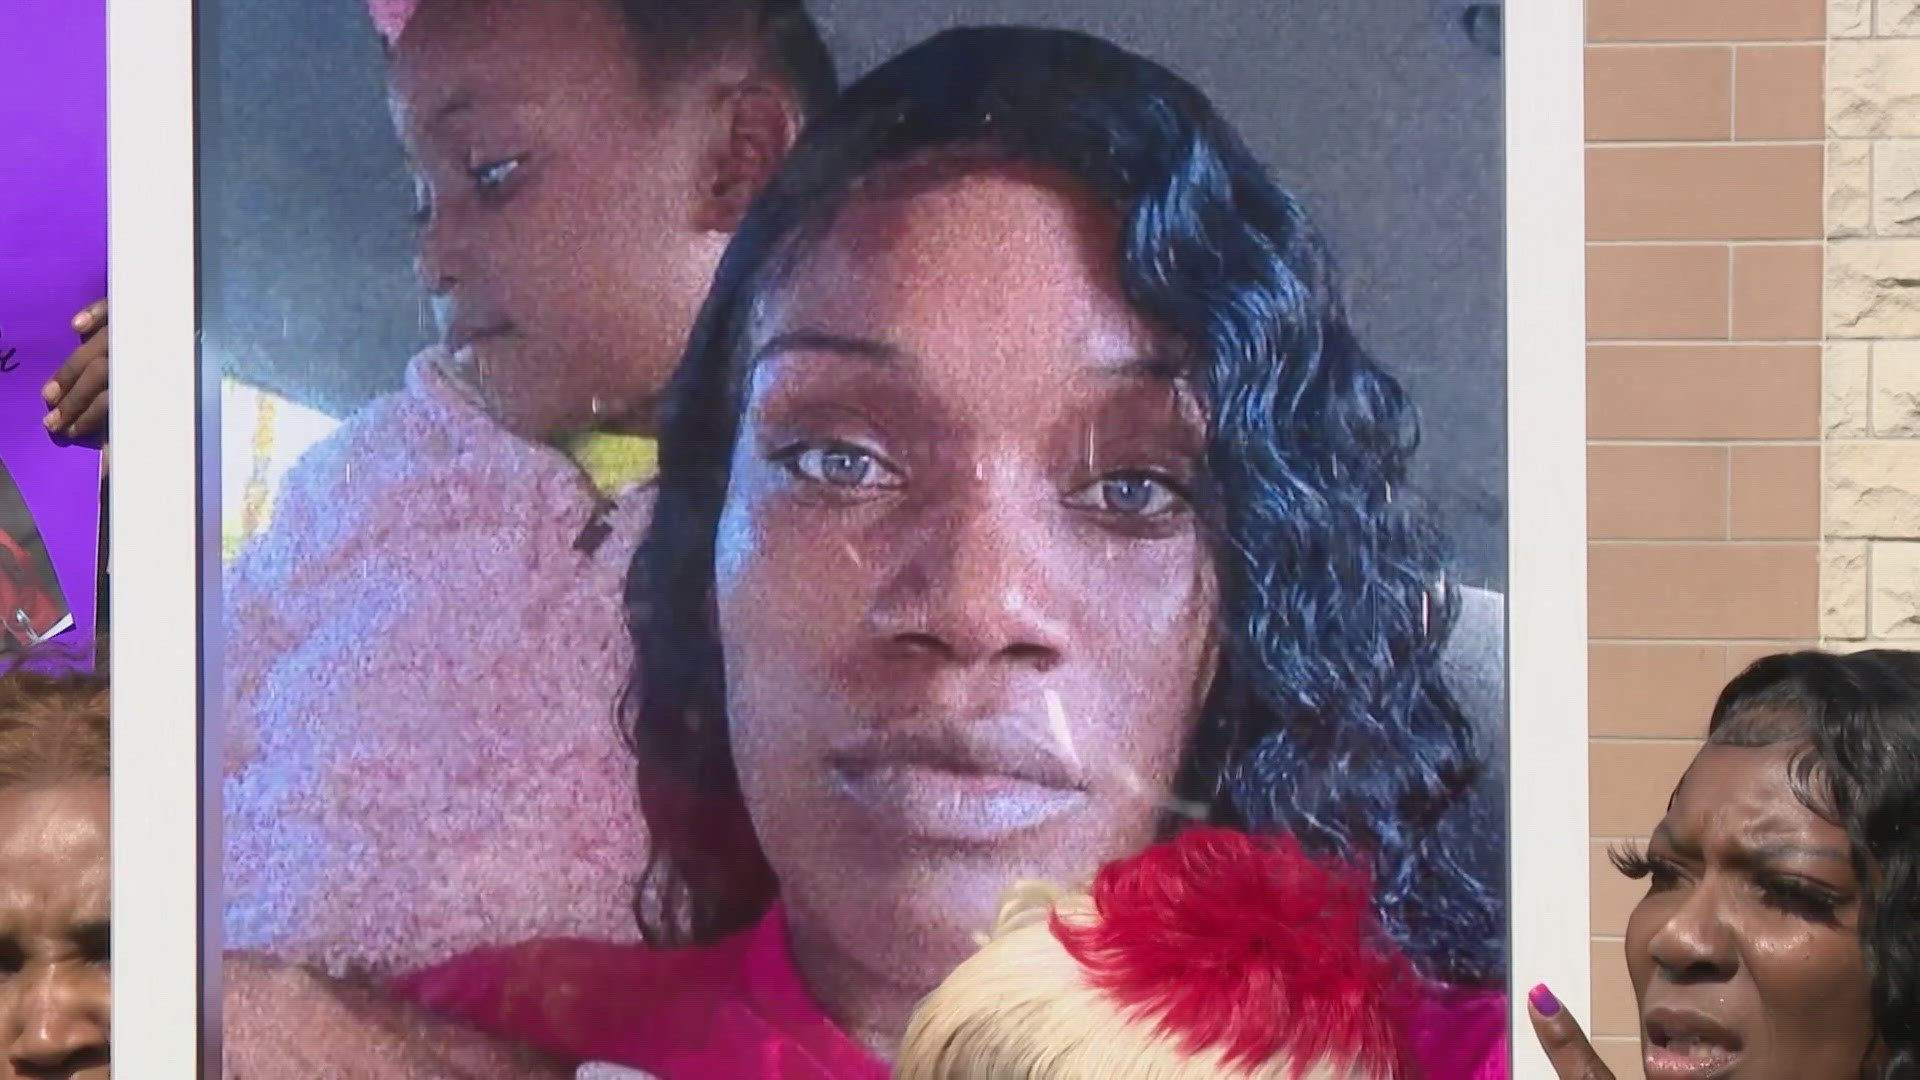 Brittany Anderson, 32, died Thursday (Feb. 1). Officials haven't said what circumstances may have led to her death, but an investigation is underway.